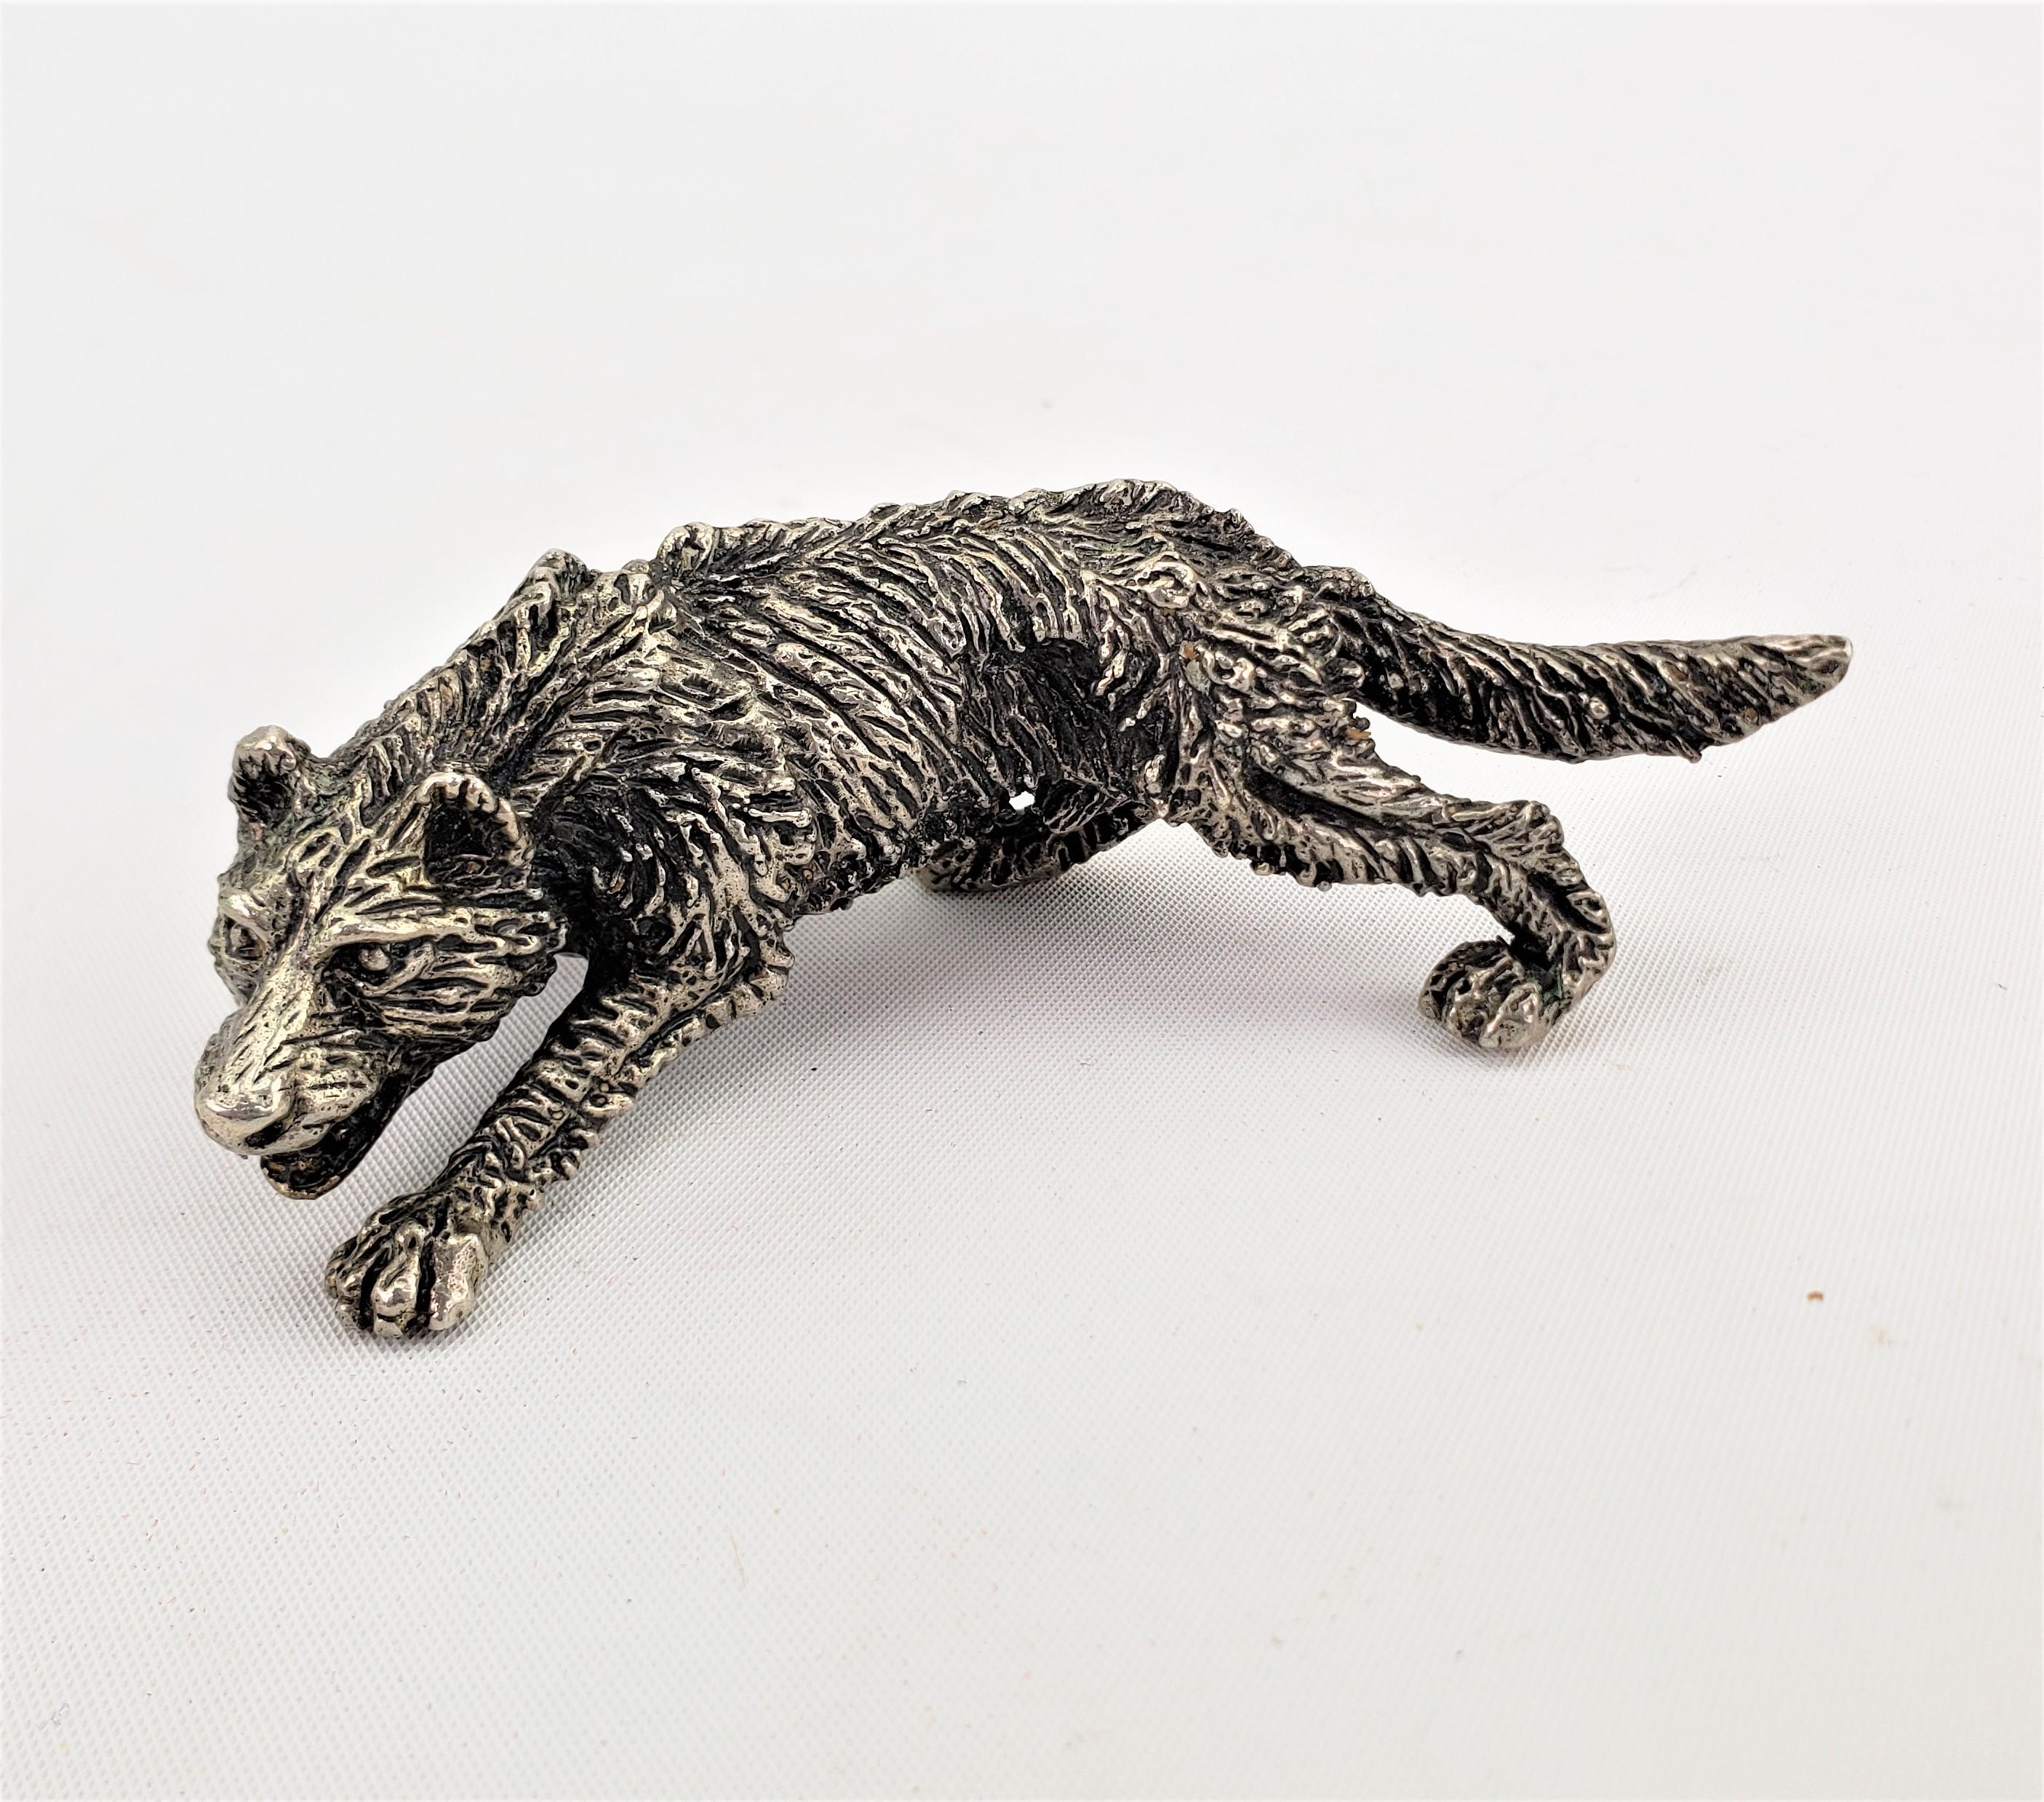 Antique Art Deco Cast Continental Silver Crouched Wolf Sculpture or Figurine For Sale 2